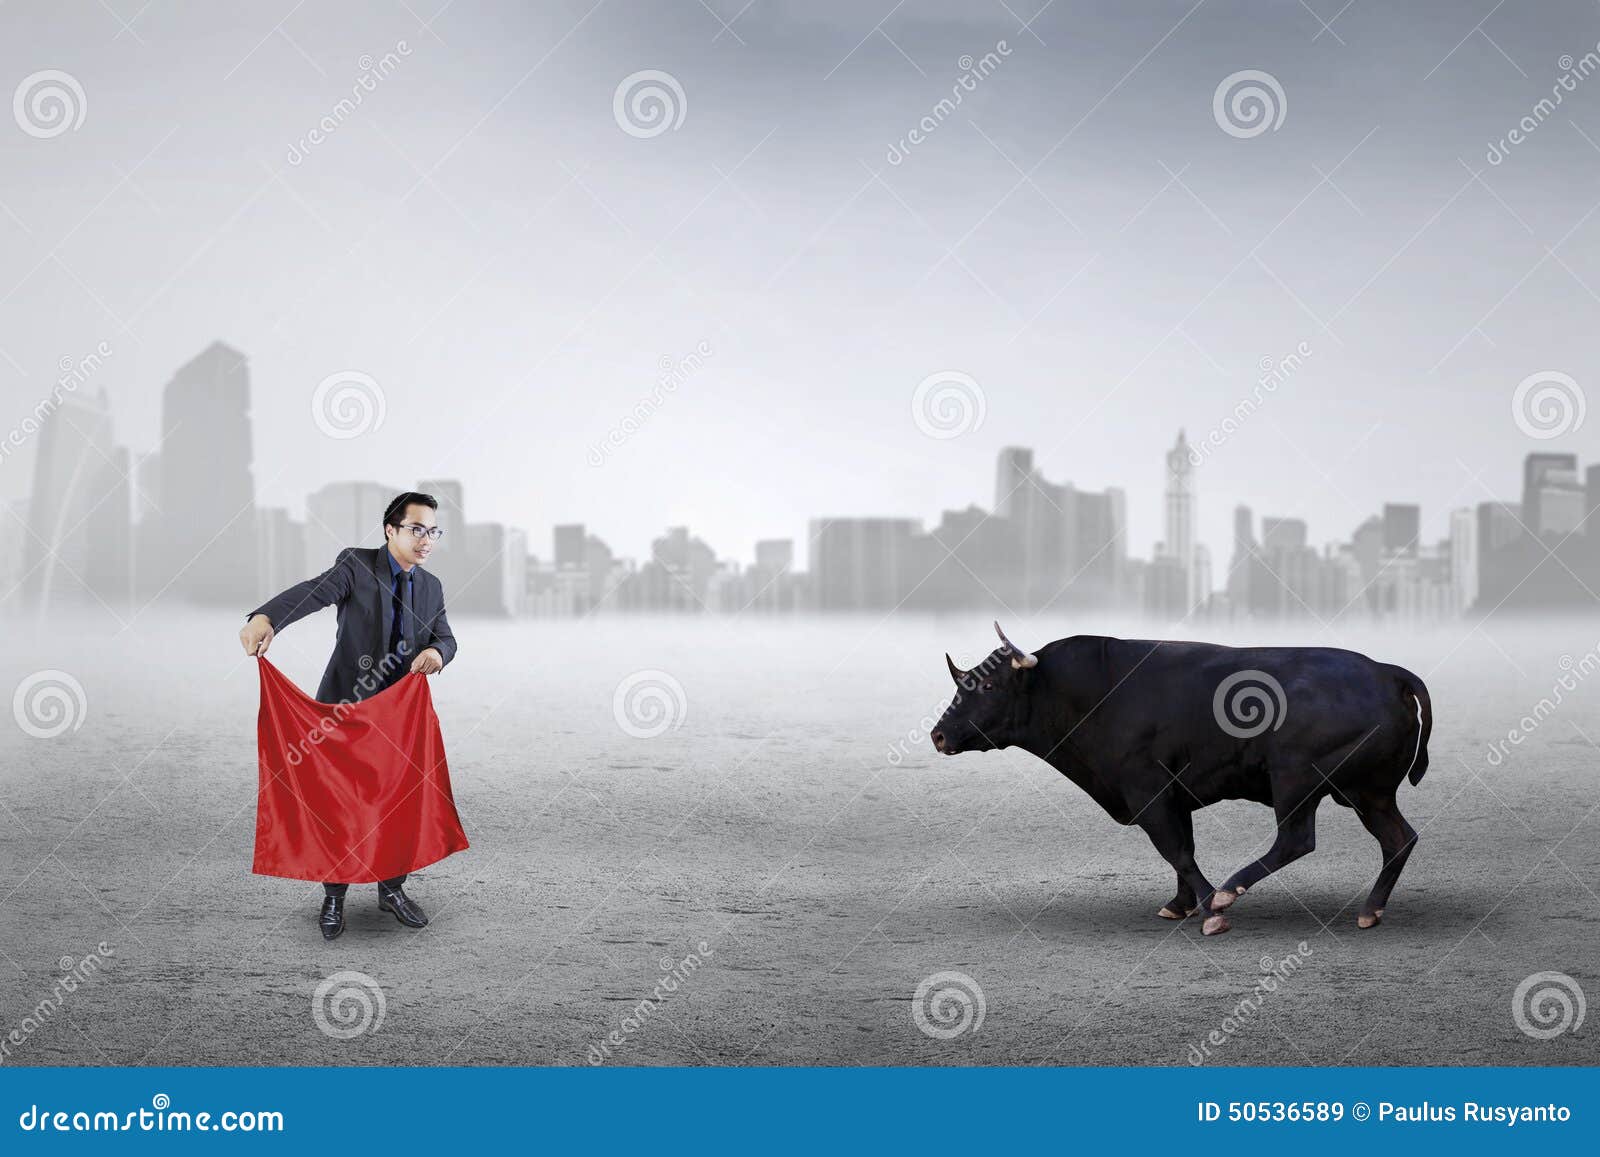 Male Entrepreneur Fighting with a Bull Stock Image - Image of city